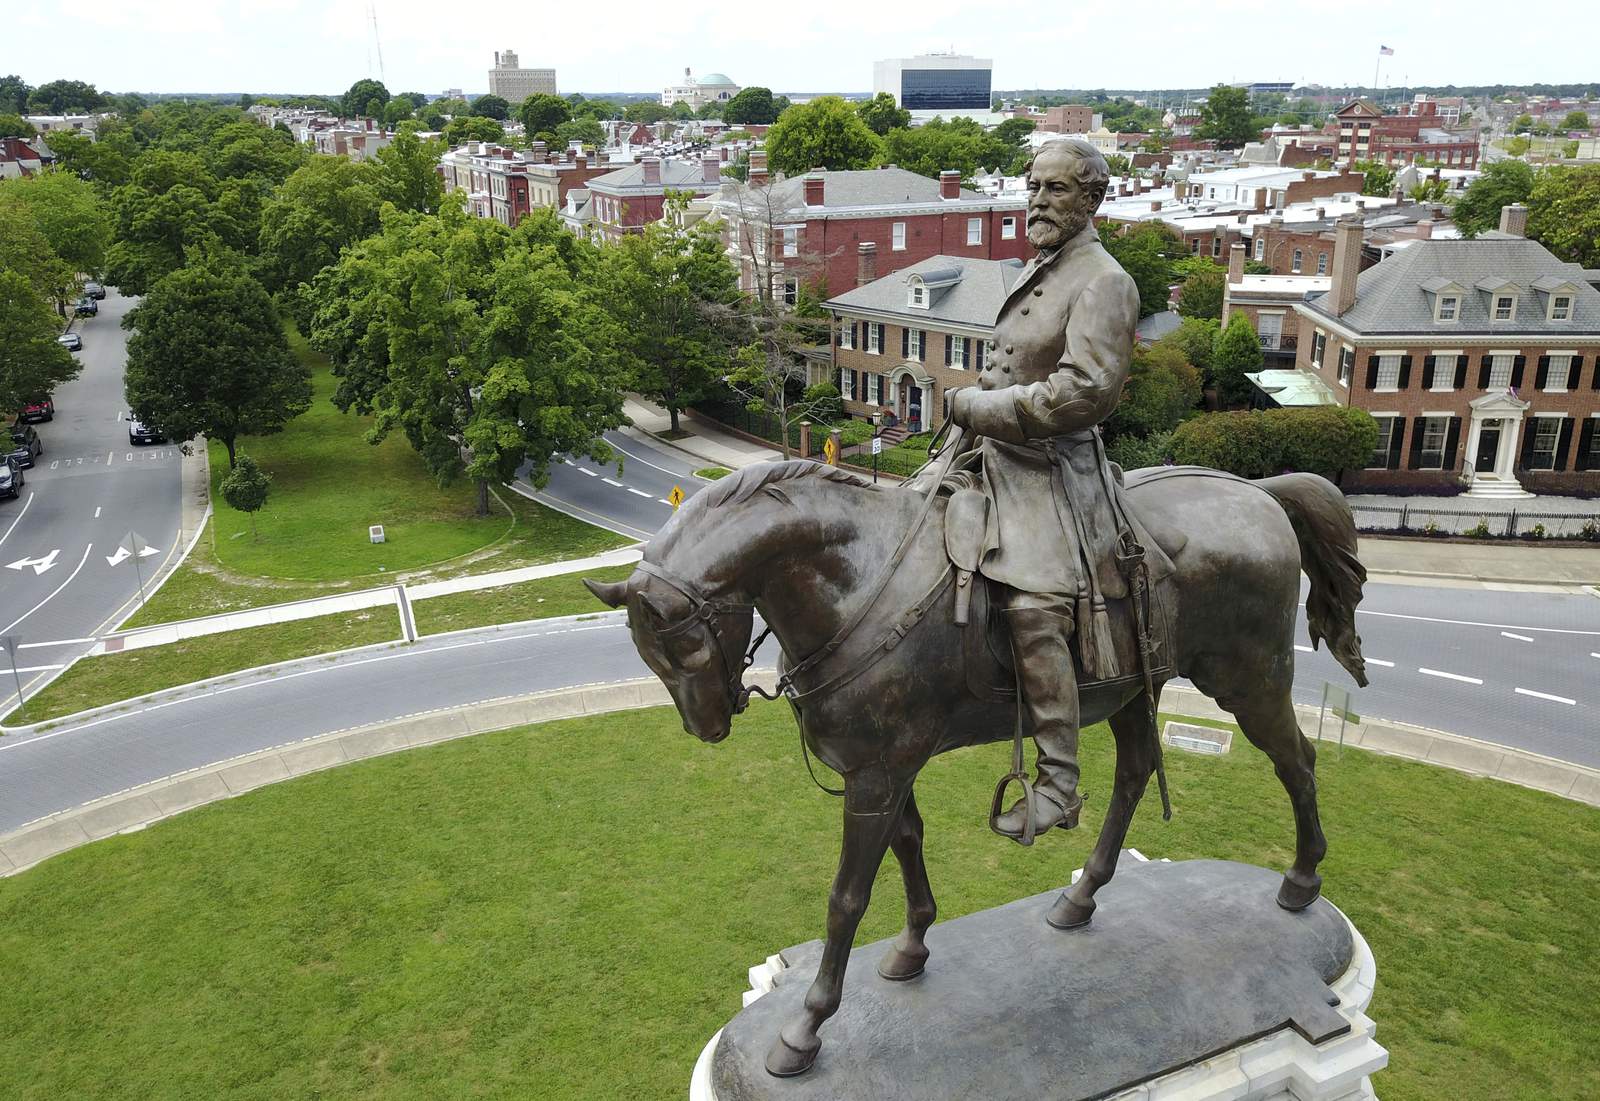 Attorney General asks Supreme Court to reject appeal in Lee statue case